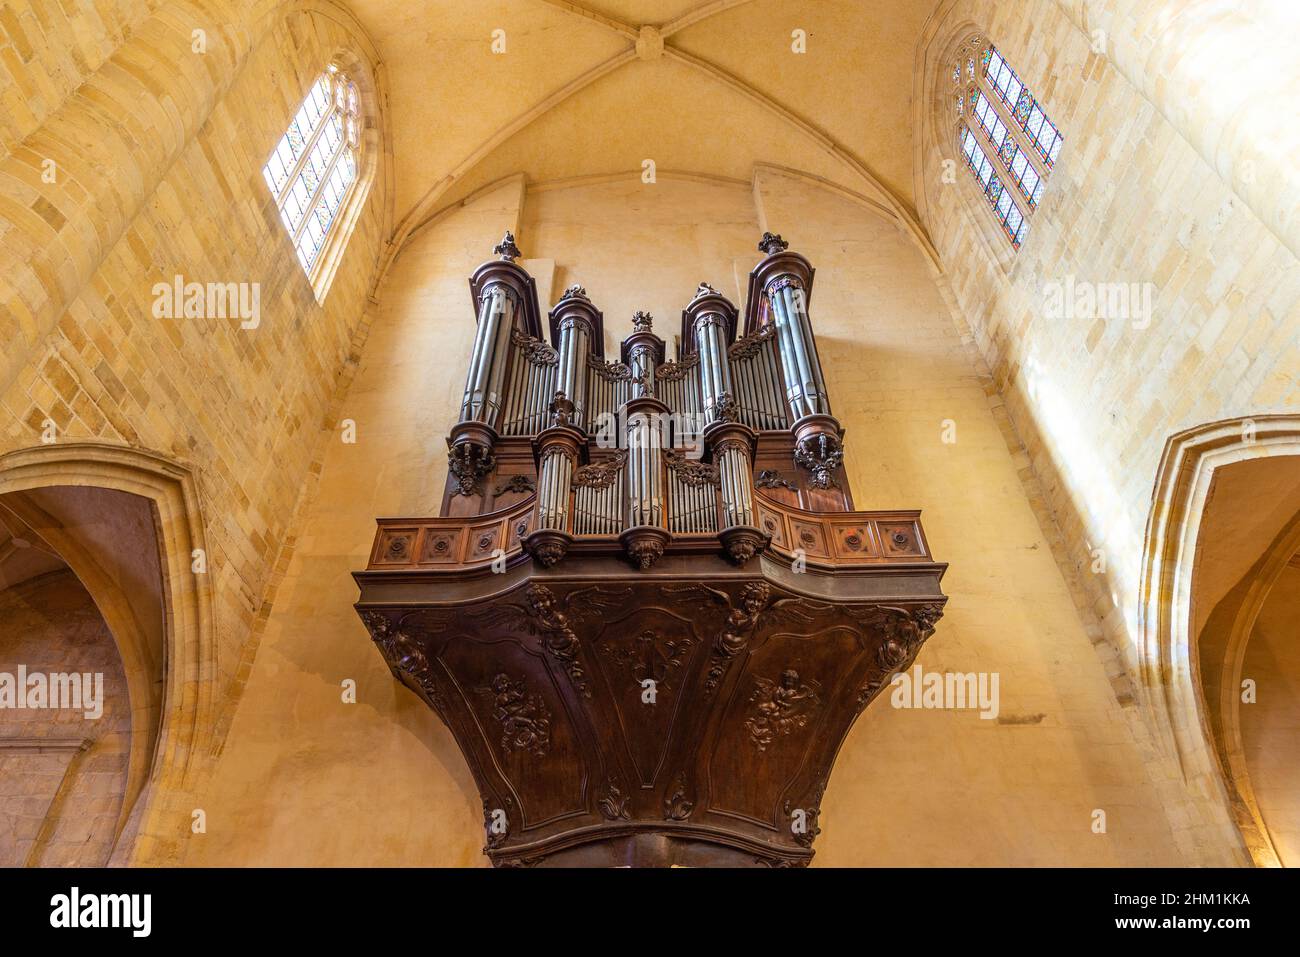 An old organ in a beautiful french yellow stone medieval church in Sarlat-la-Caneda, Perigord, France, taken on a sunny autumn afternoon Stock Photo